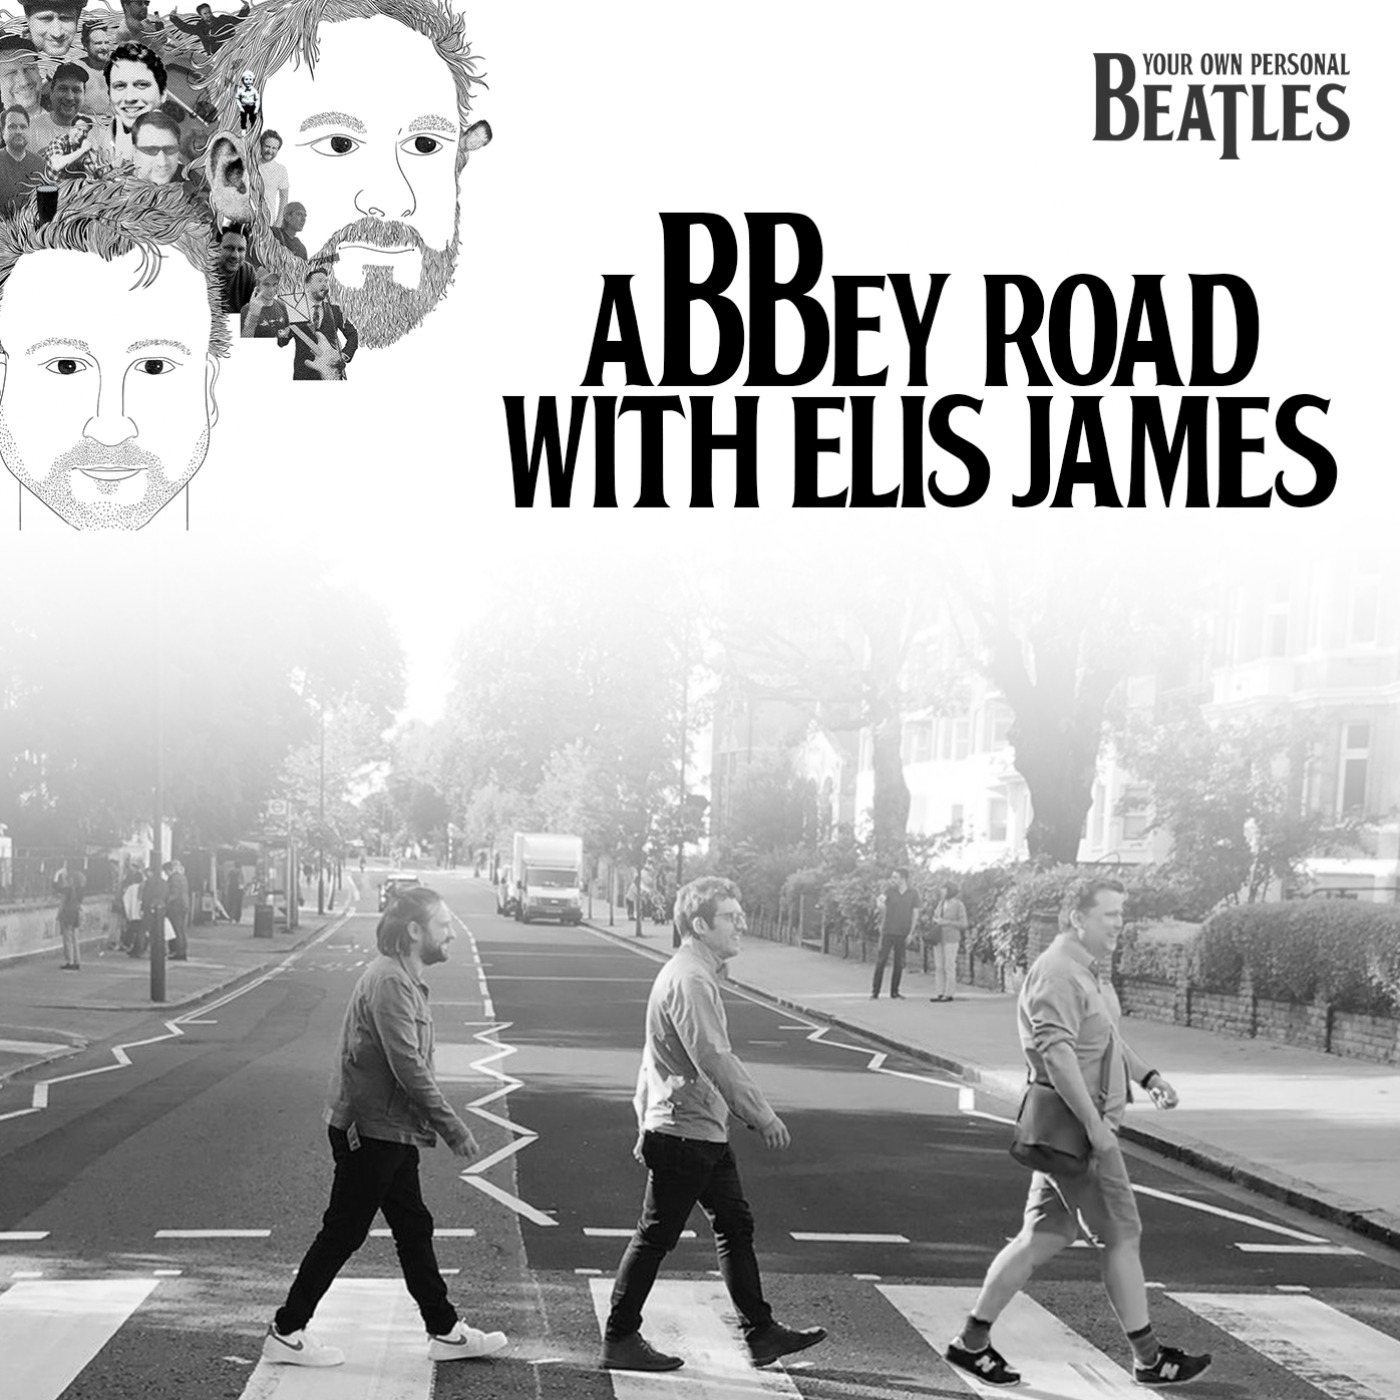 Abbey Road with Elis James